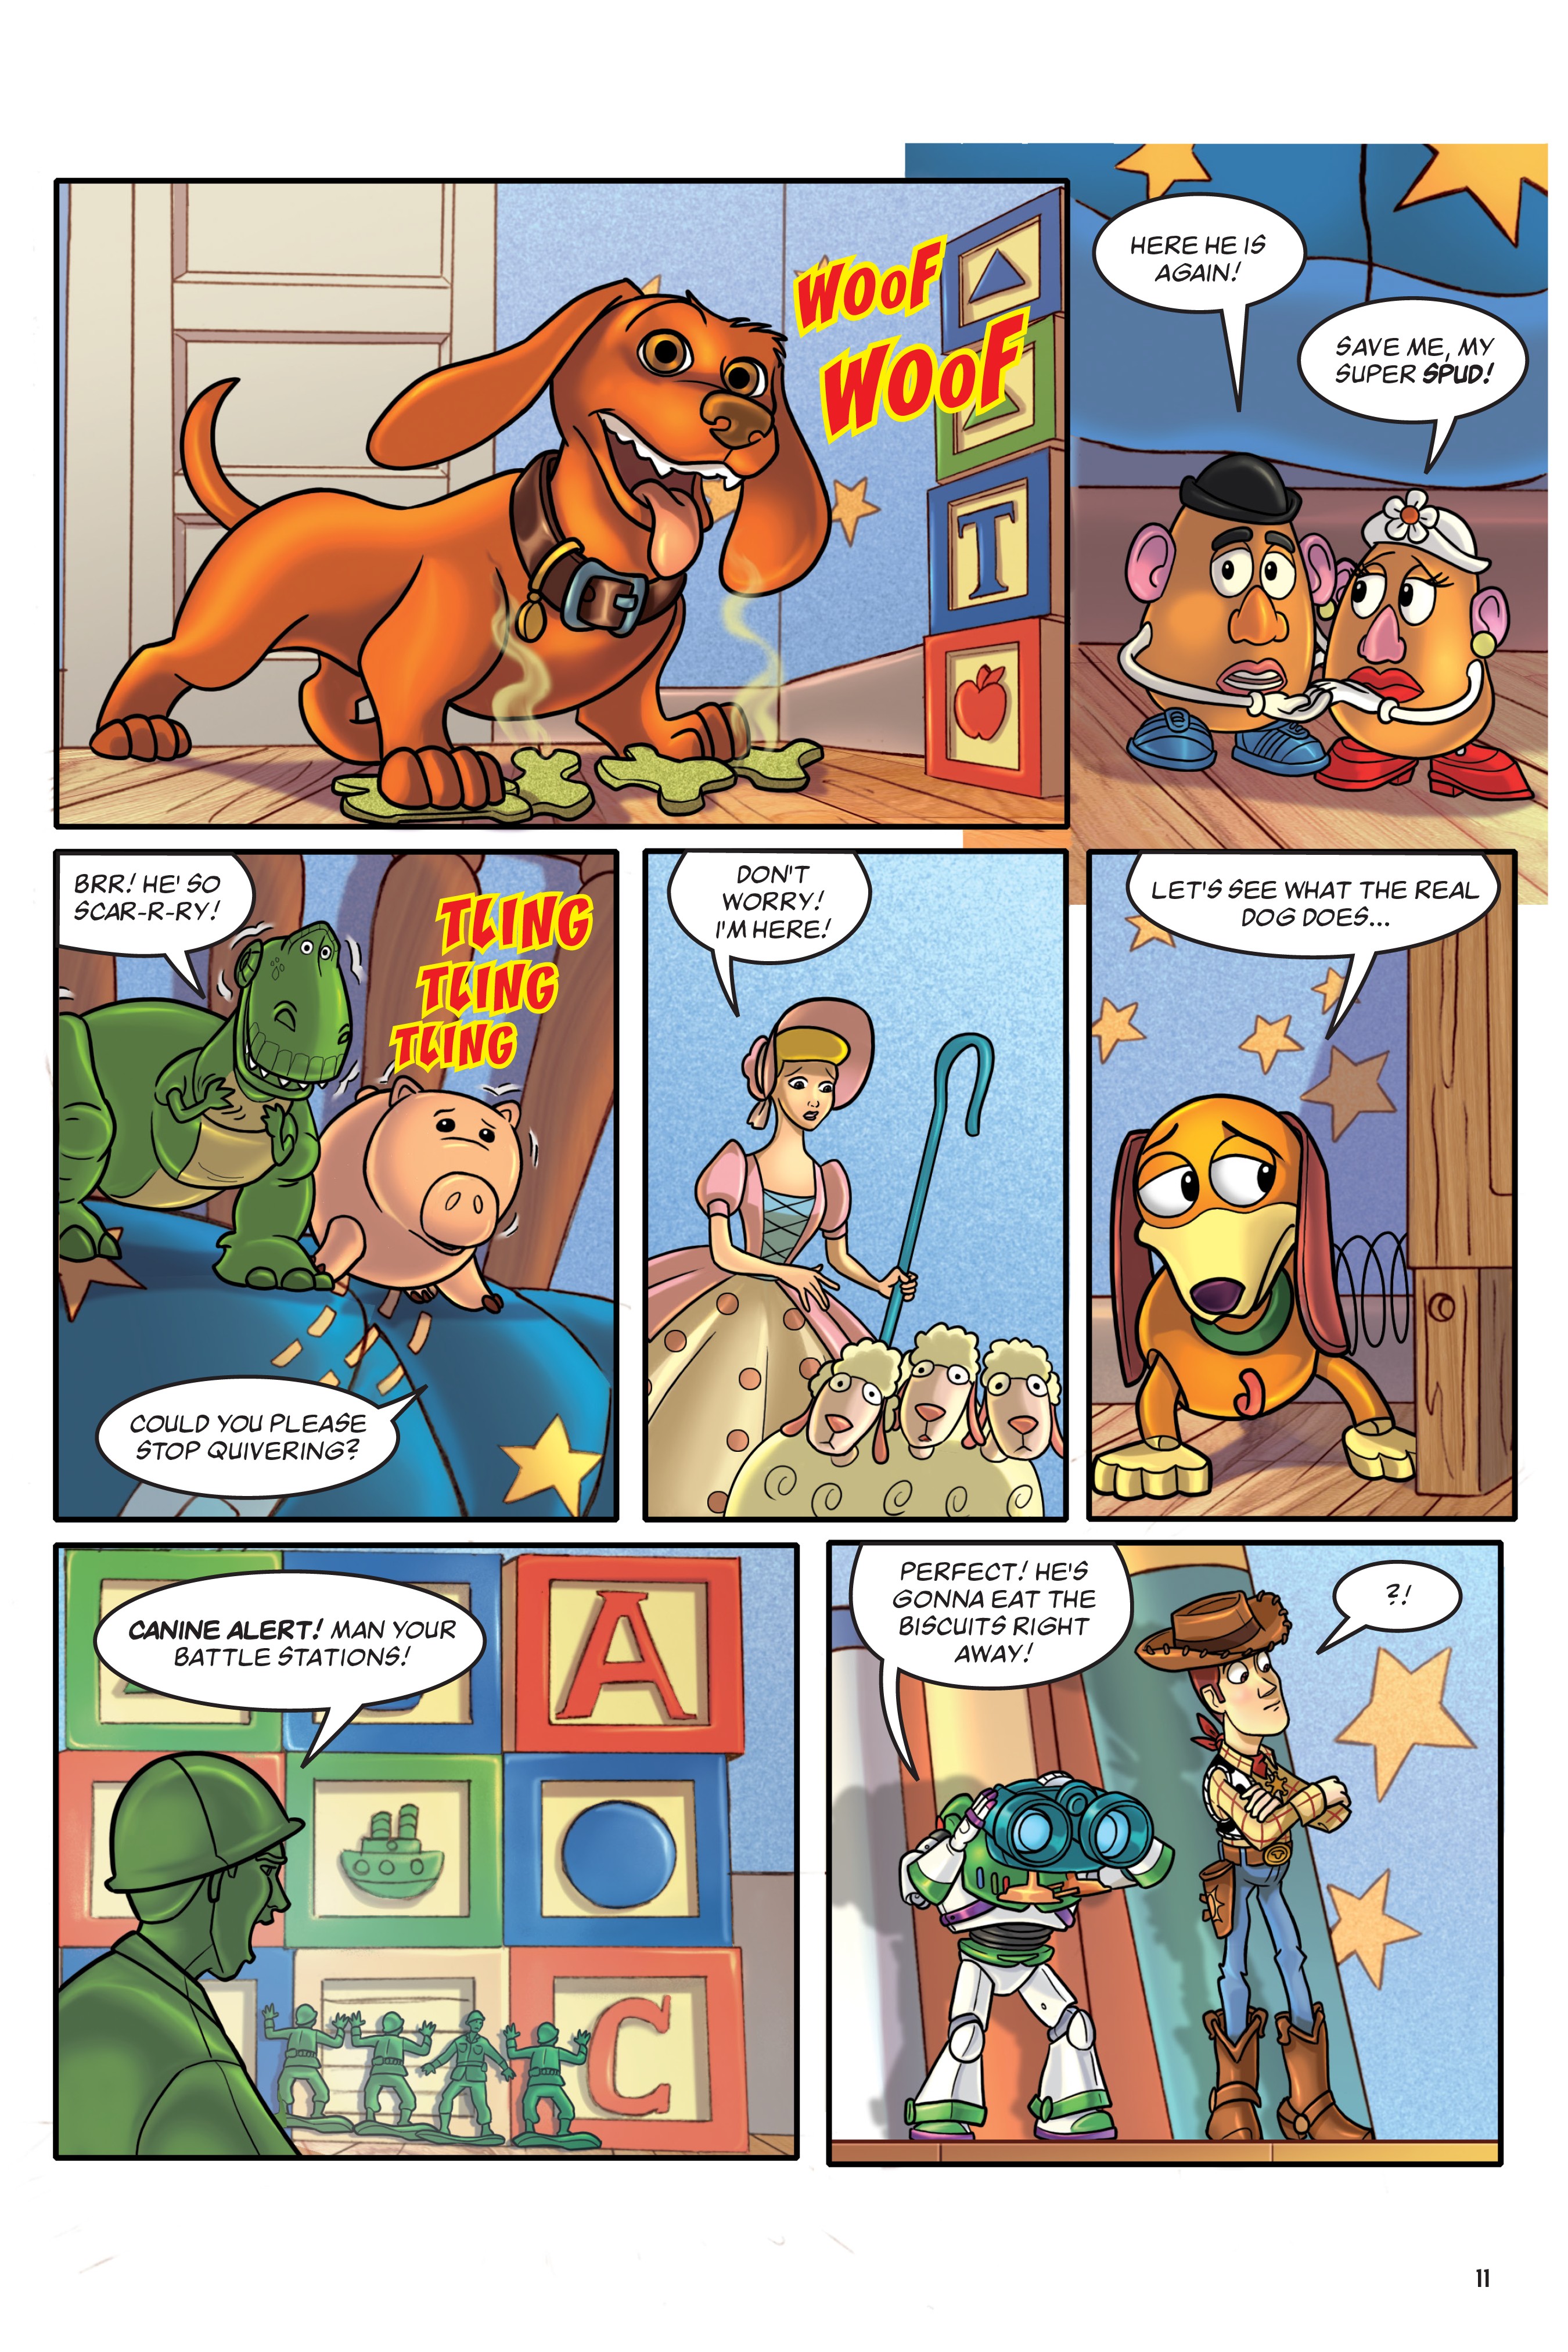 Disney Pixar Toy Story Adventures Tpb 1 Part 1 | Read Disney Pixar Toy  Story Adventures Tpb 1 Part 1 comic online in high quality. Read Full Comic  online for free -